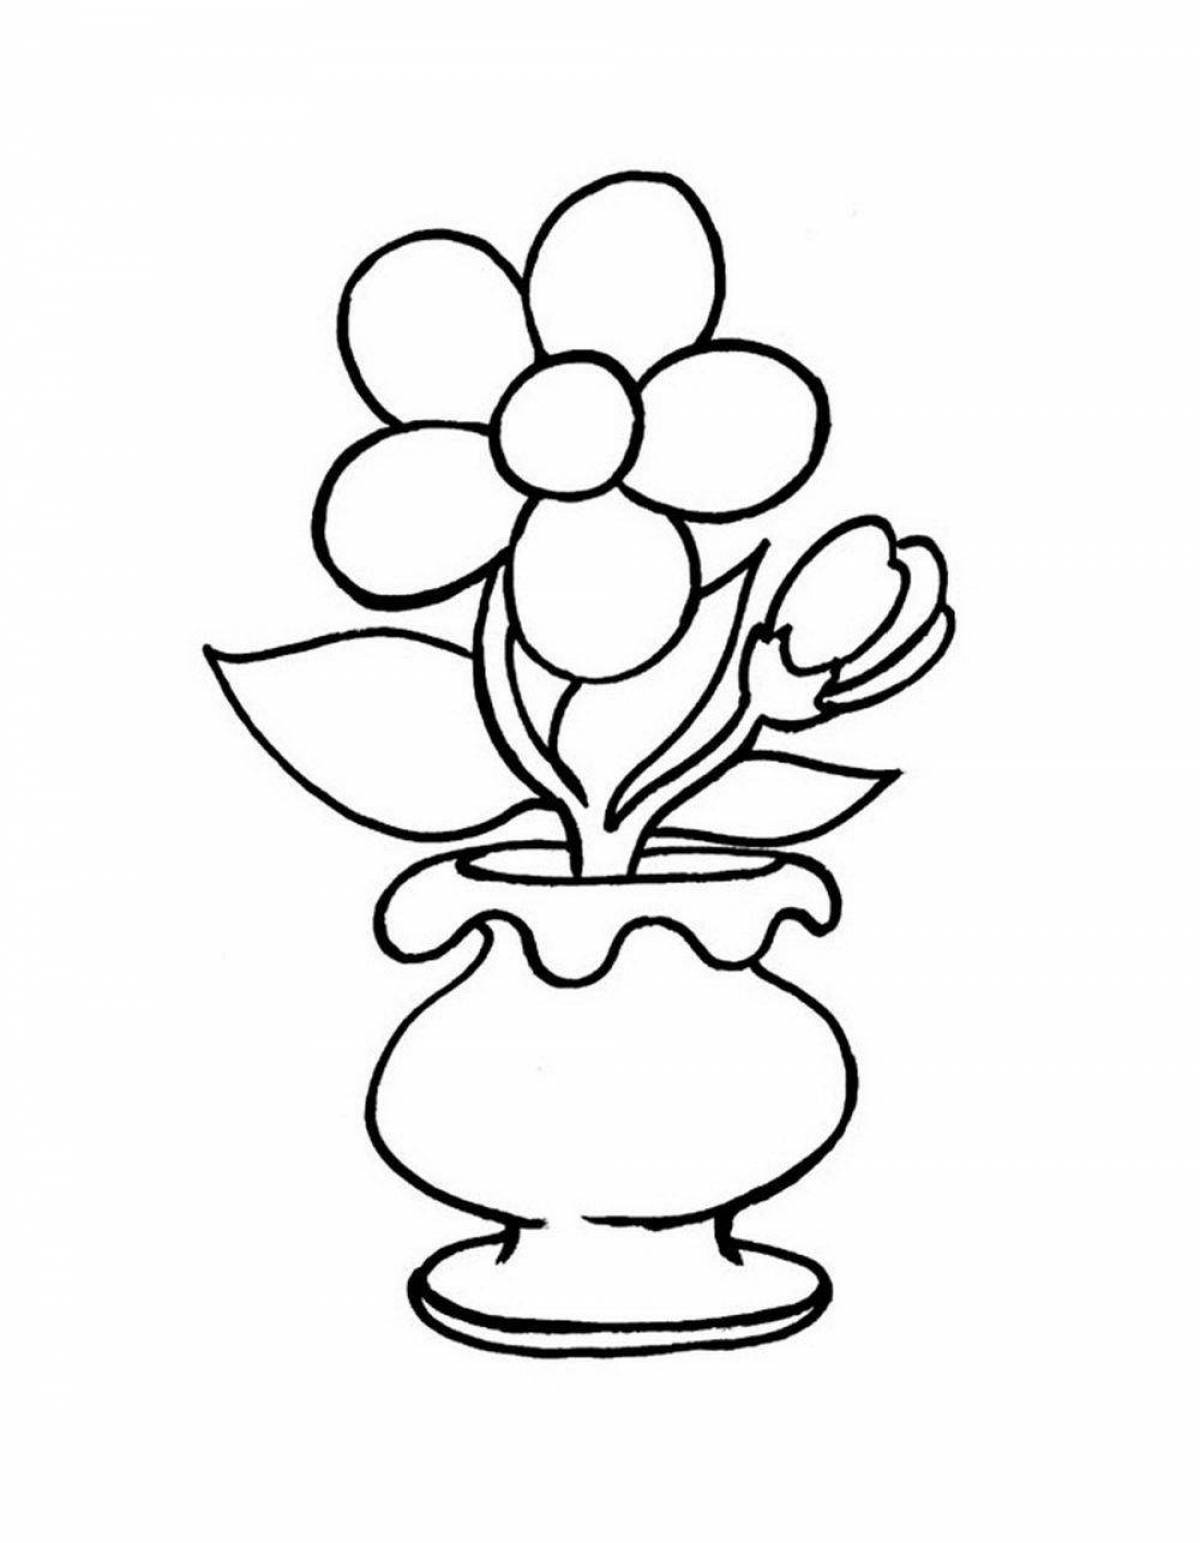 Glitter vase with flowers coloring book for children 5-6 years old